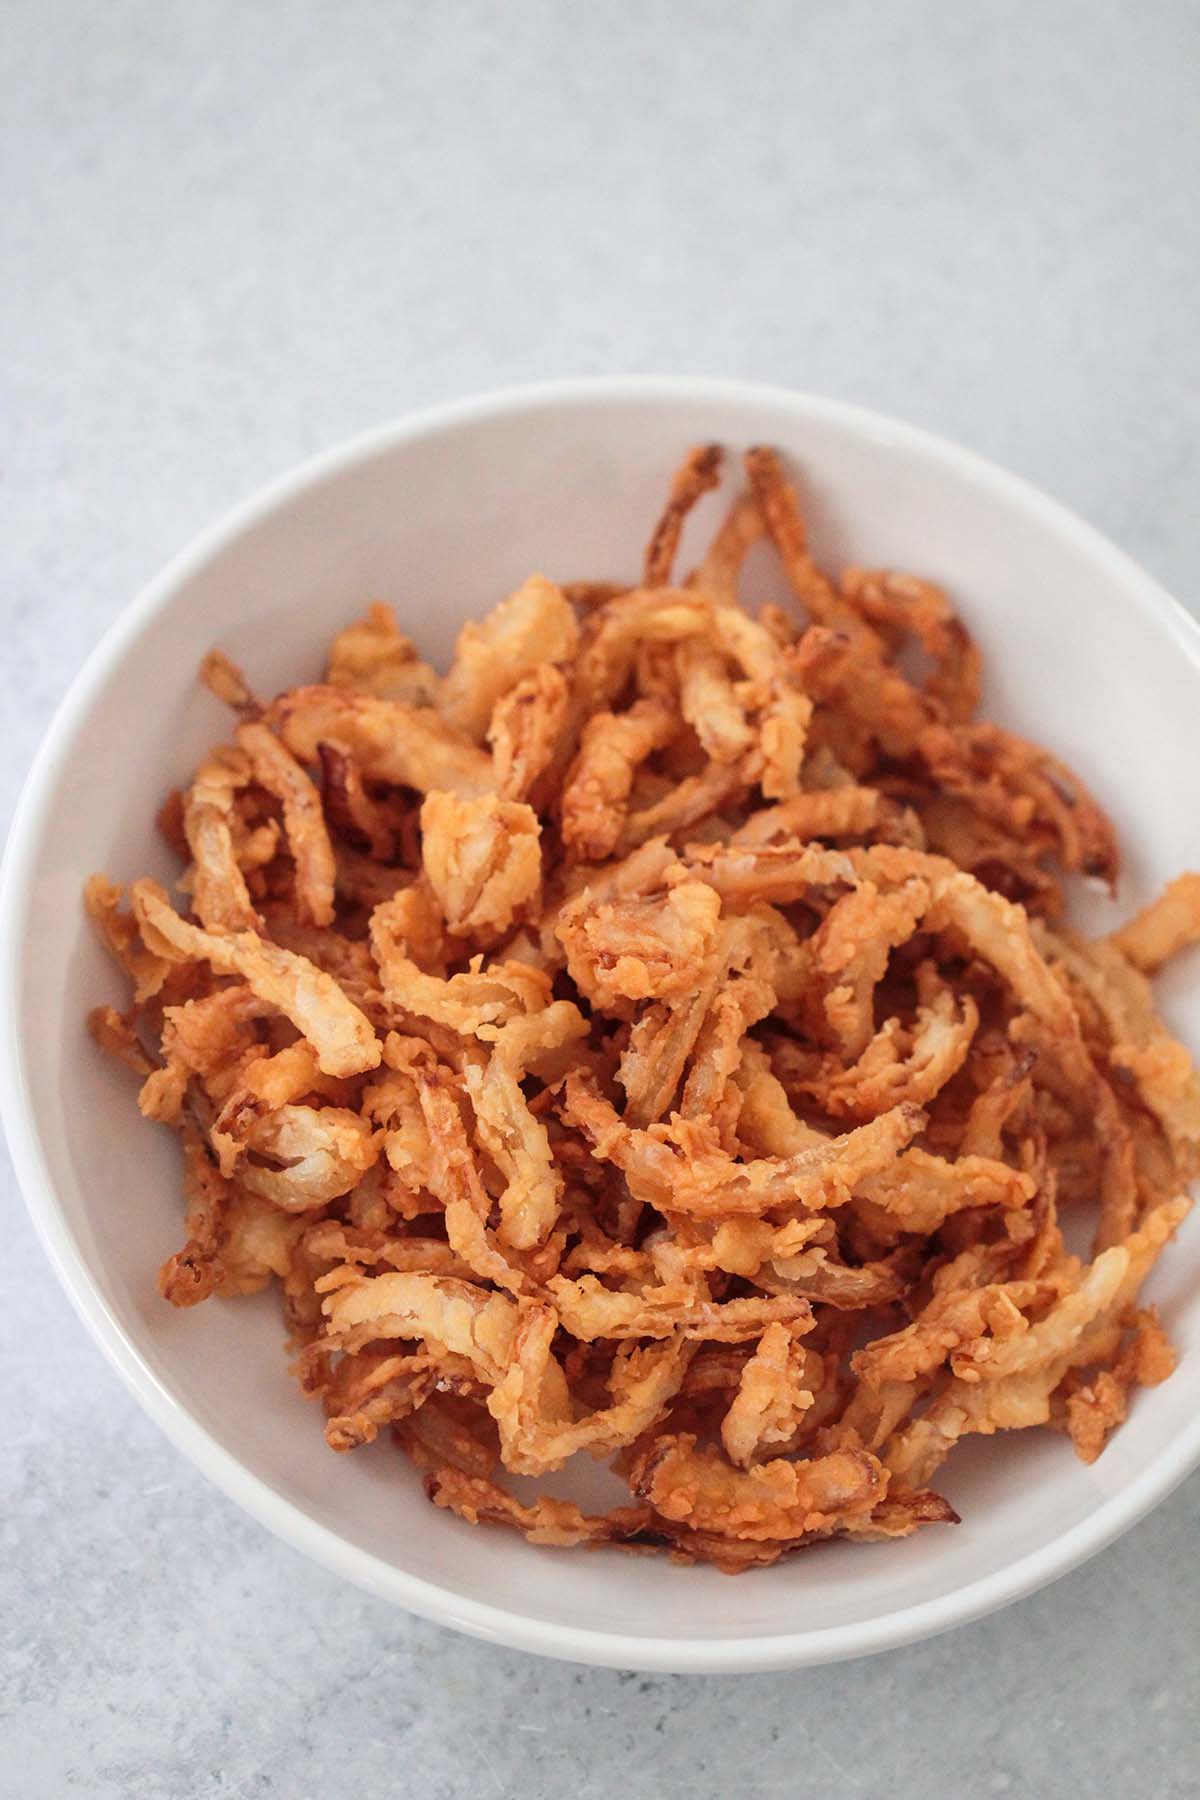 https://www.cookedbyjulie.com/wp-content/uploads/2022/02/French-fried-onions-one.jpg